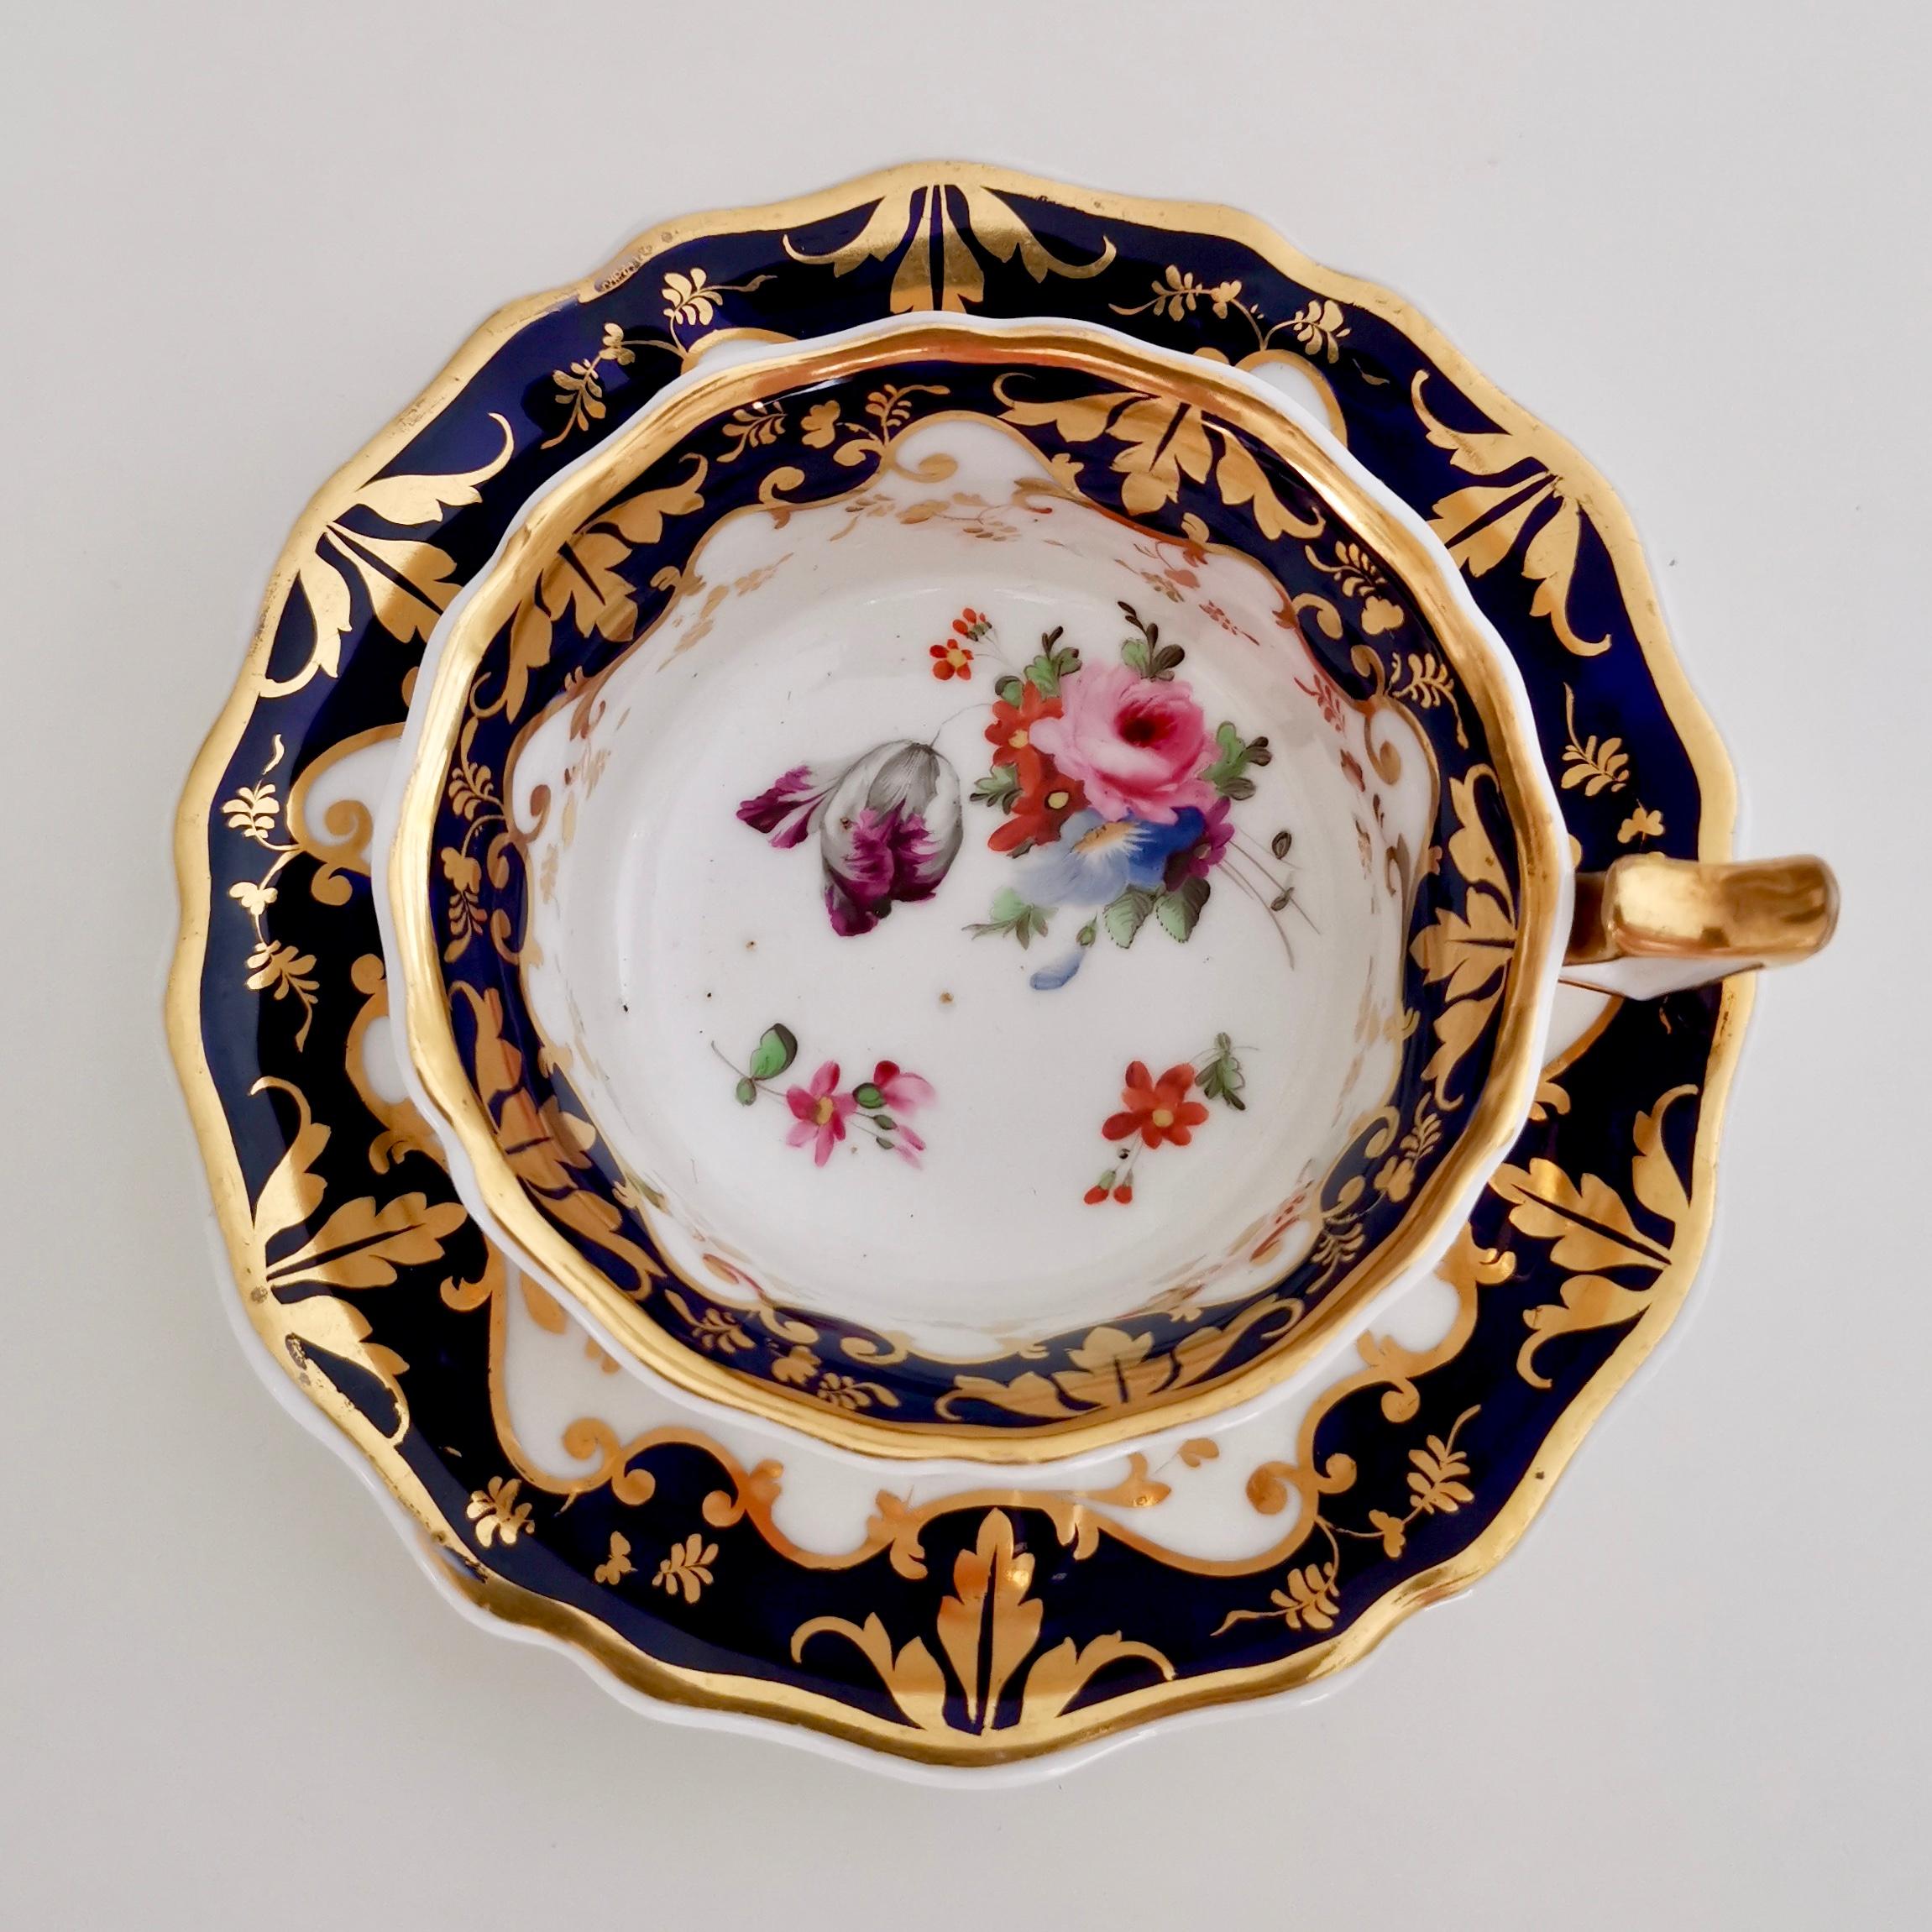 This is a Ridgway teacup and saucer made between 1820 and 1825, which is known as the Regency period. The shape is typical for its time and is called the 